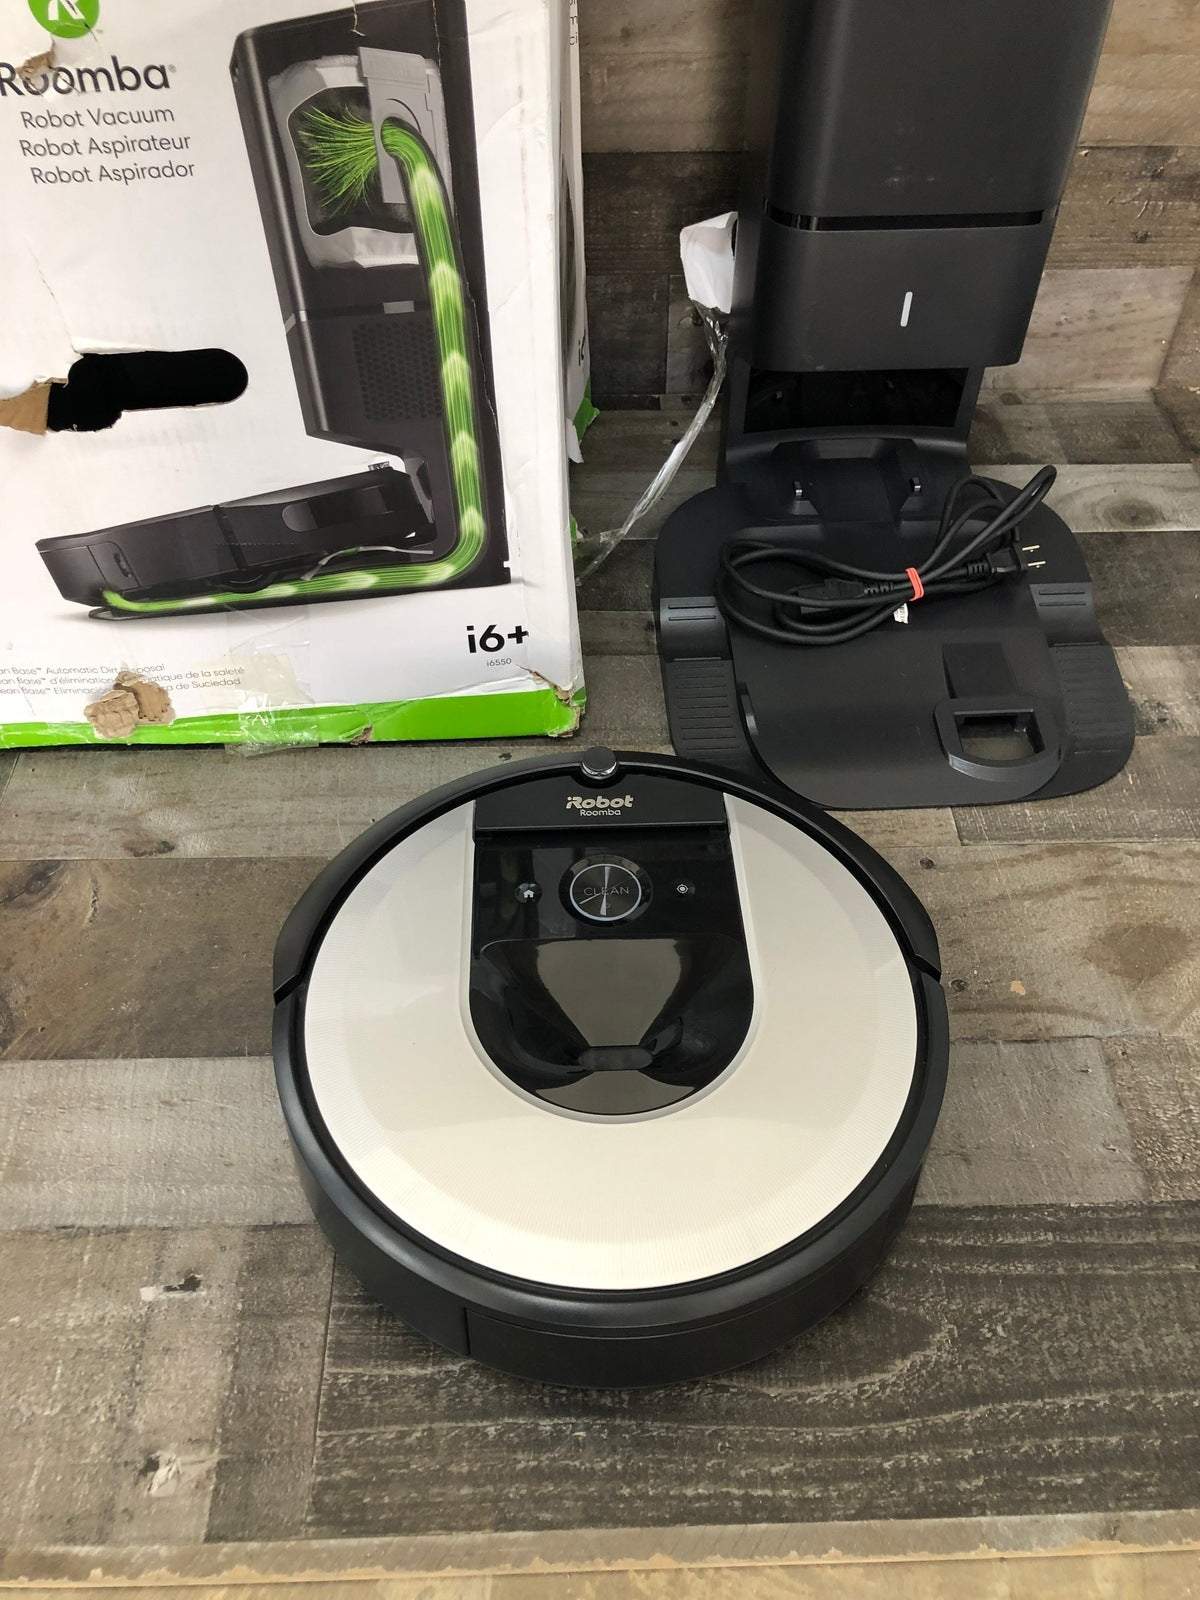 iRobot Roomba i6+ 6550 Robot Vacuum with Automatic Dirt Disposal-Empties Itself for up to 60 Days, Wi-Fi Connected, Works with Alexa, Carpets, Smart Mapping Upgrade - Clean & Schedule by Room